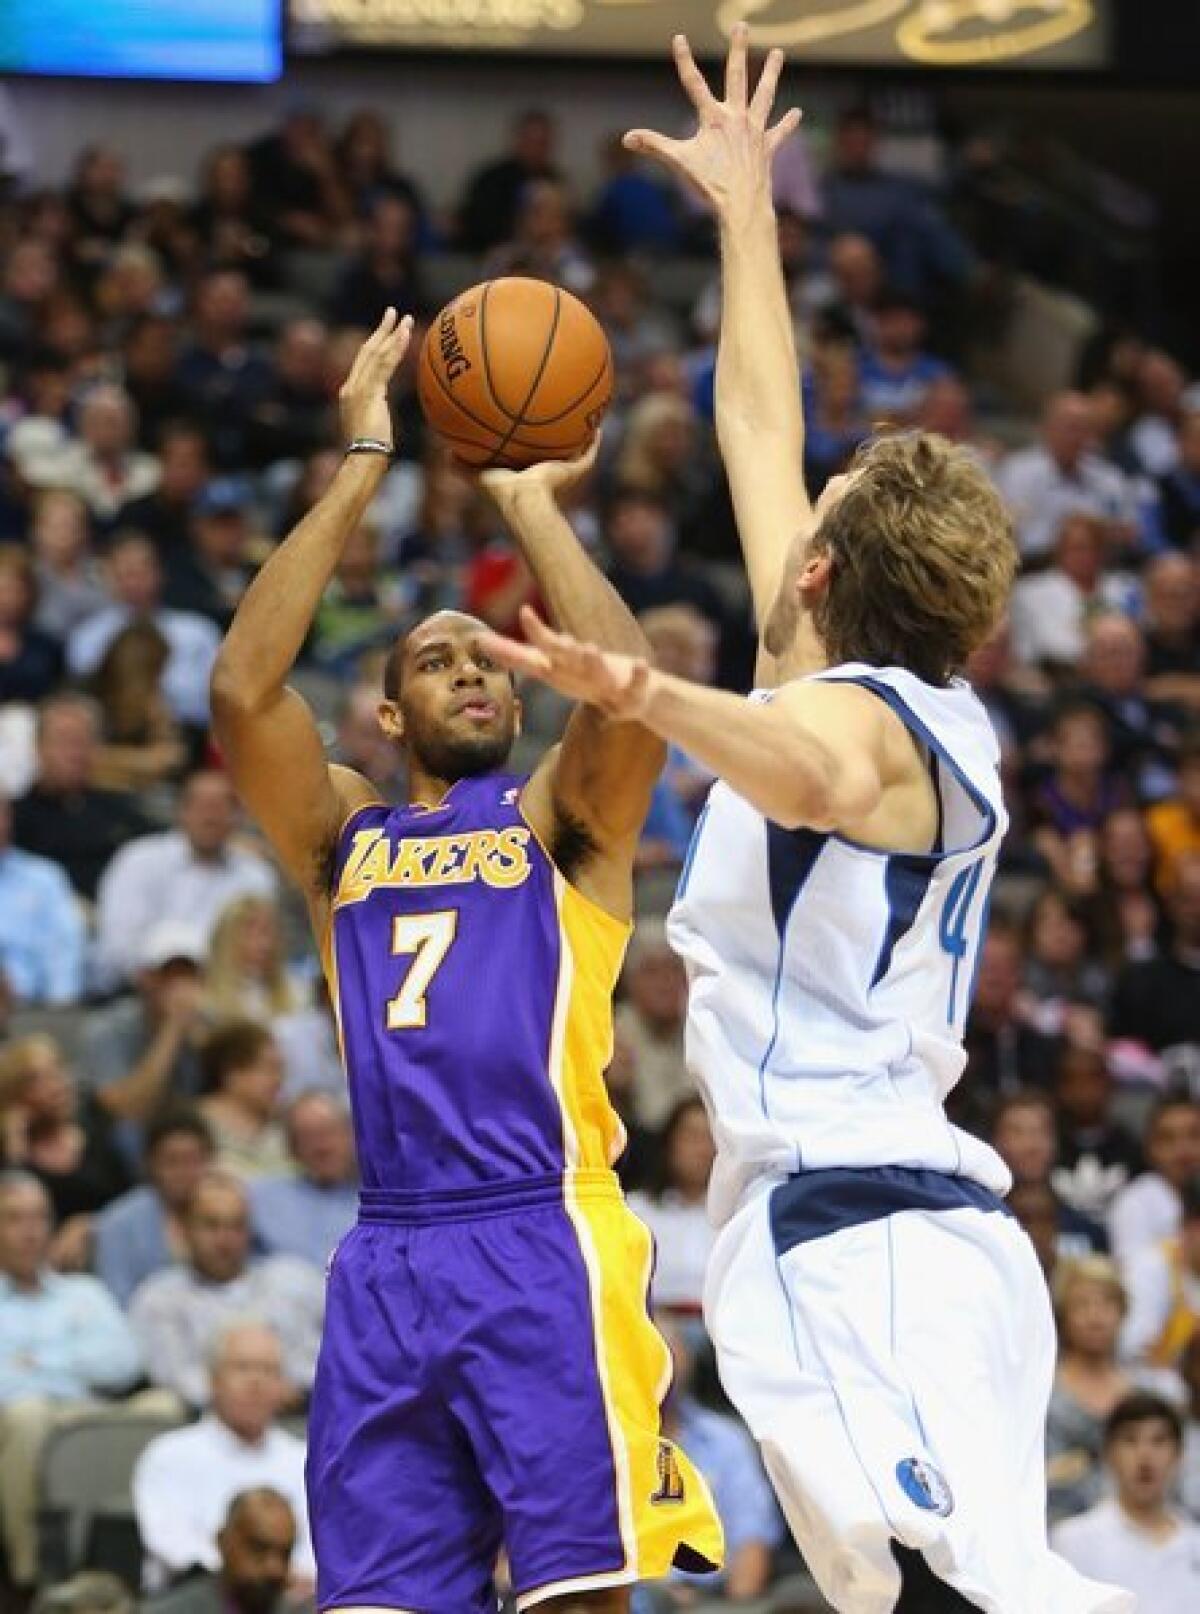 Lakers guard Xavier Henry shoots over Dallas Mavericks center Dirk Nowitzki during the Lakers' 123-104 loss Tuesday.